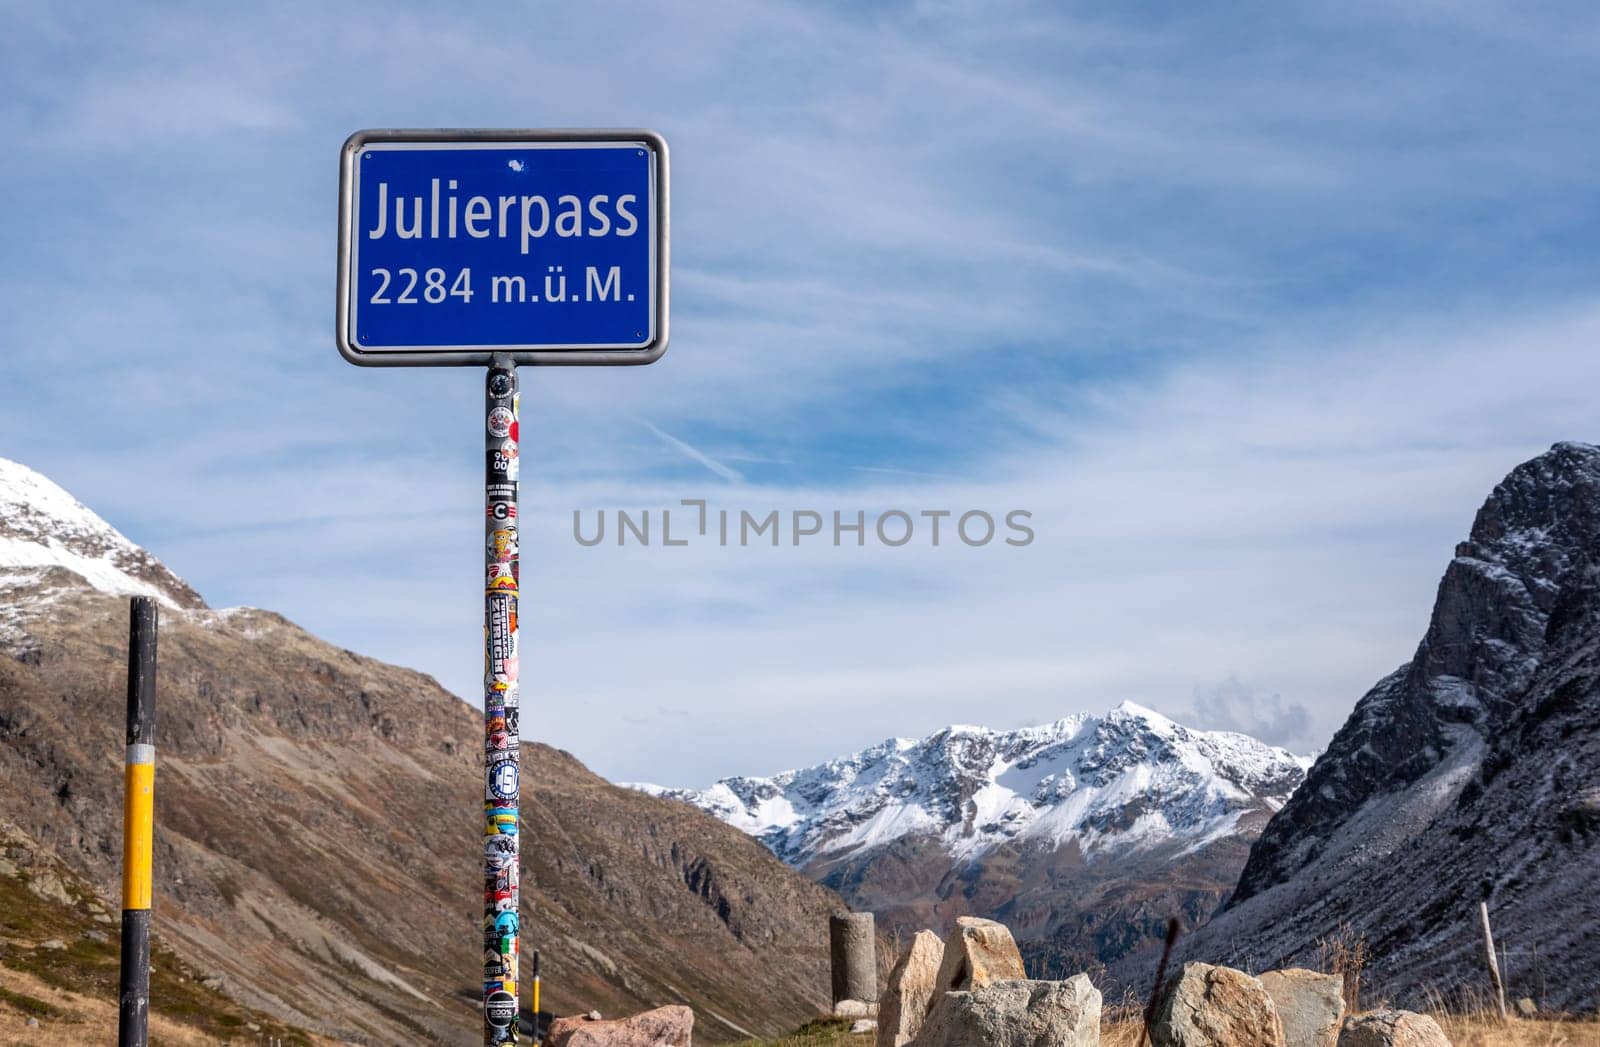 The Julier Pass in Switzerland, an important ancient Roman route crossing the alps